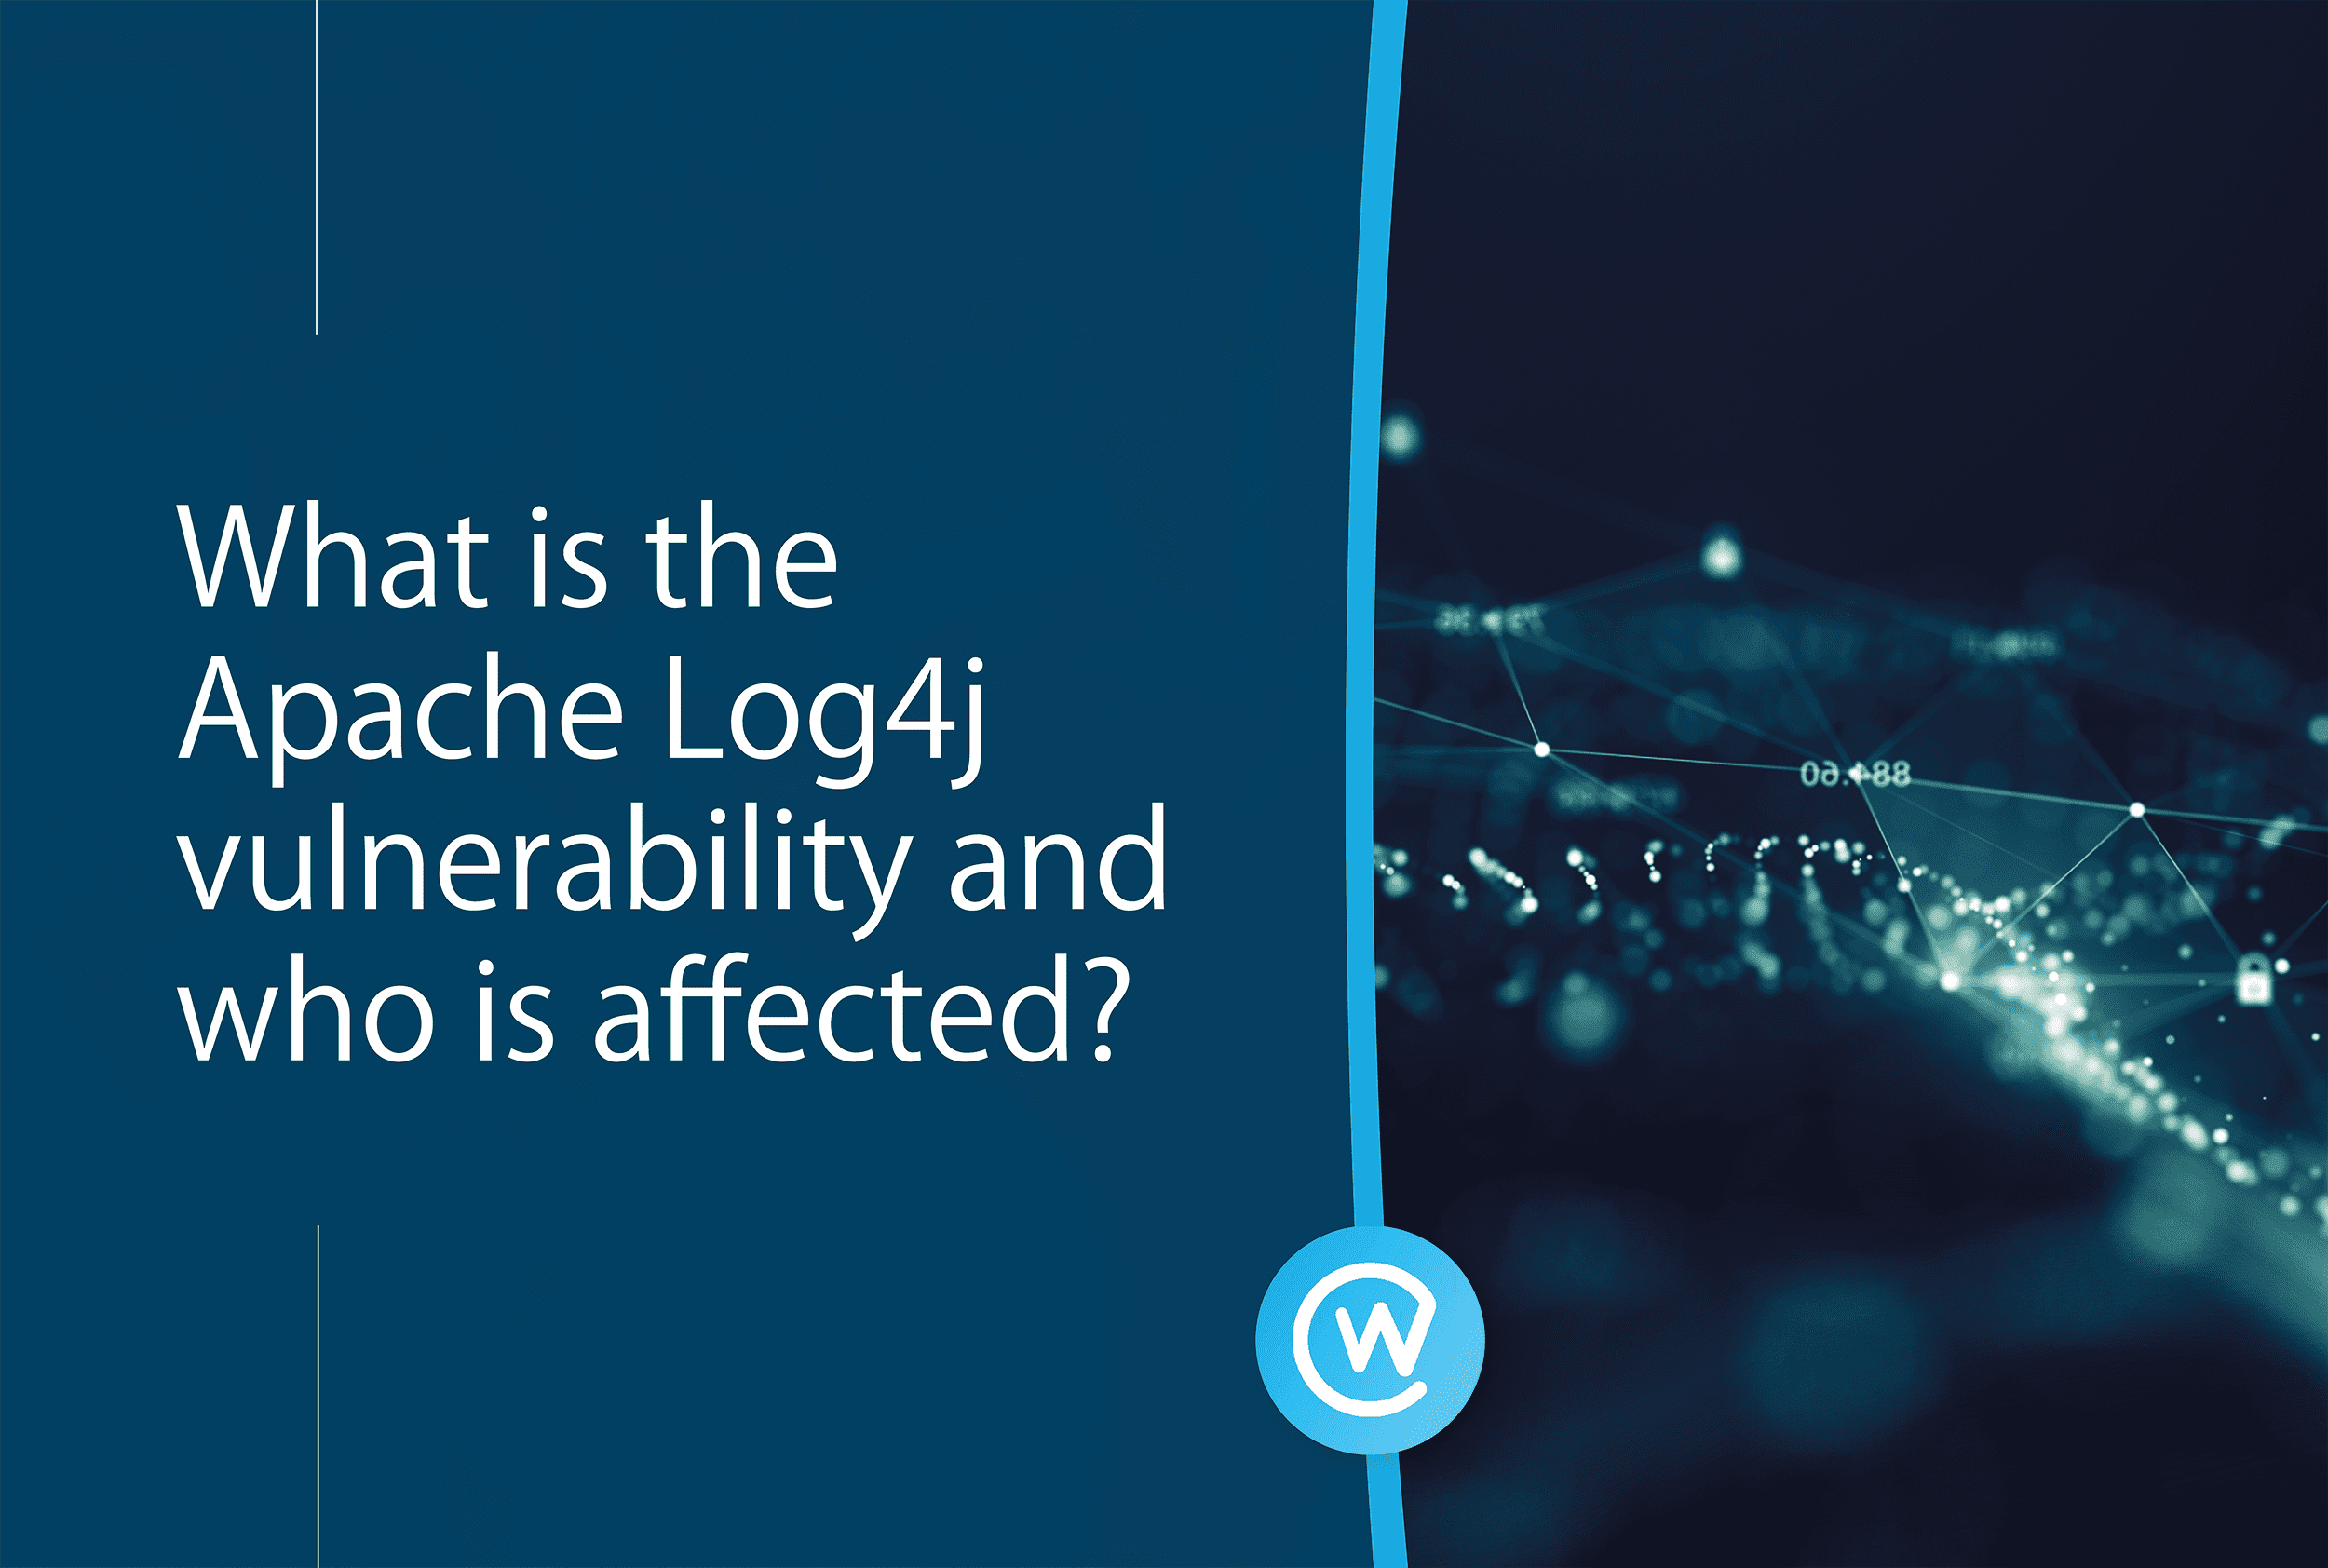 What is the Apache Log4j vulnerability and who is affected?